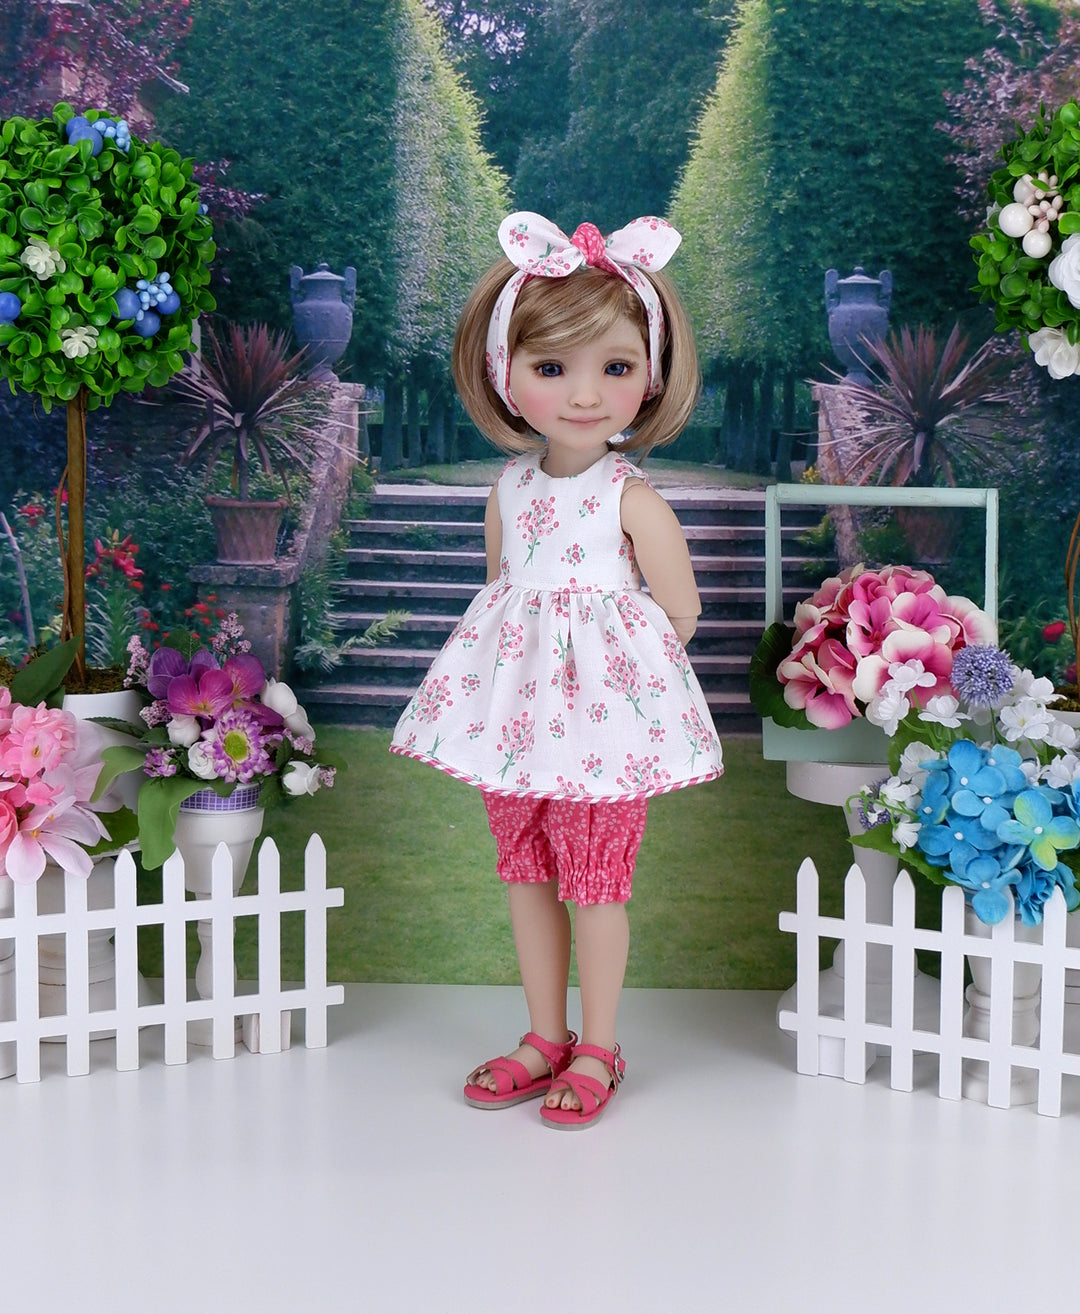 Posy Bouquet - top & bloomers with sandals for Ruby Red Fashion Friends doll